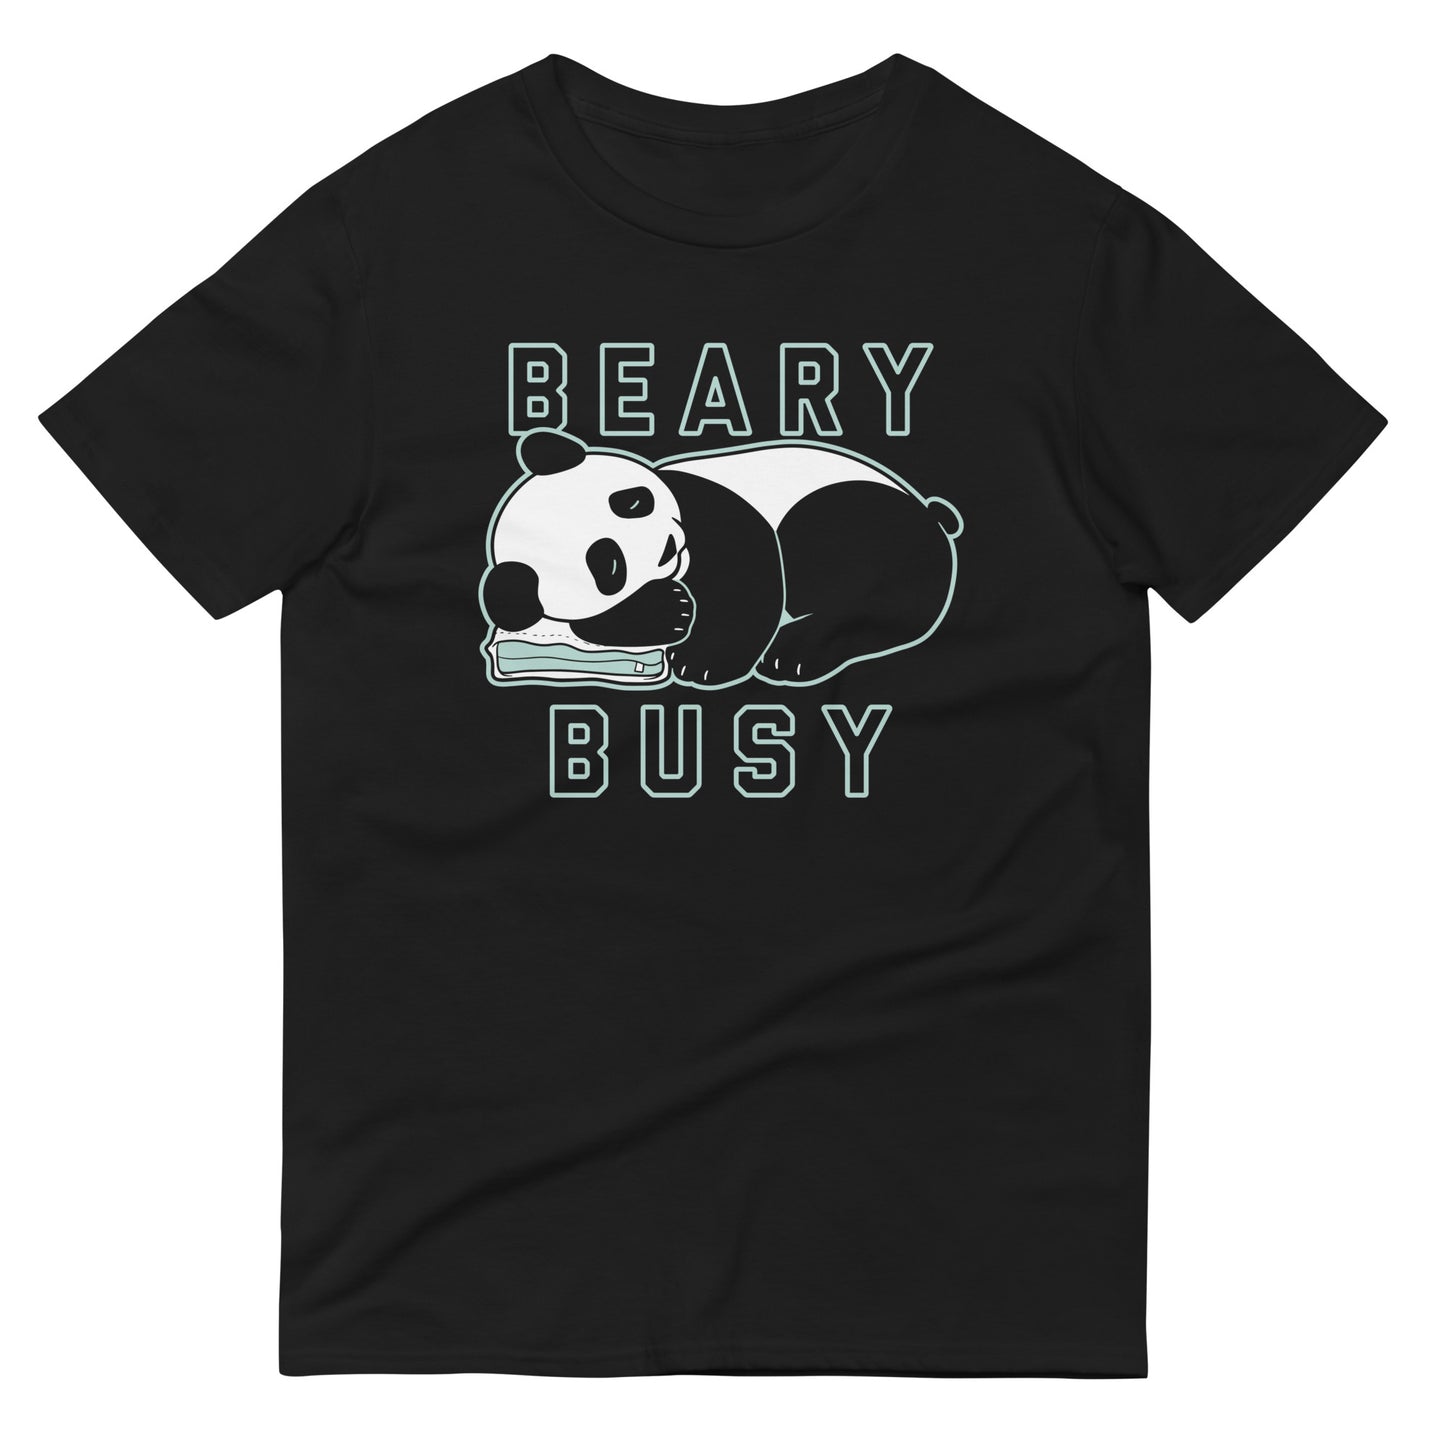 Beary Busy Men's Signature Tee